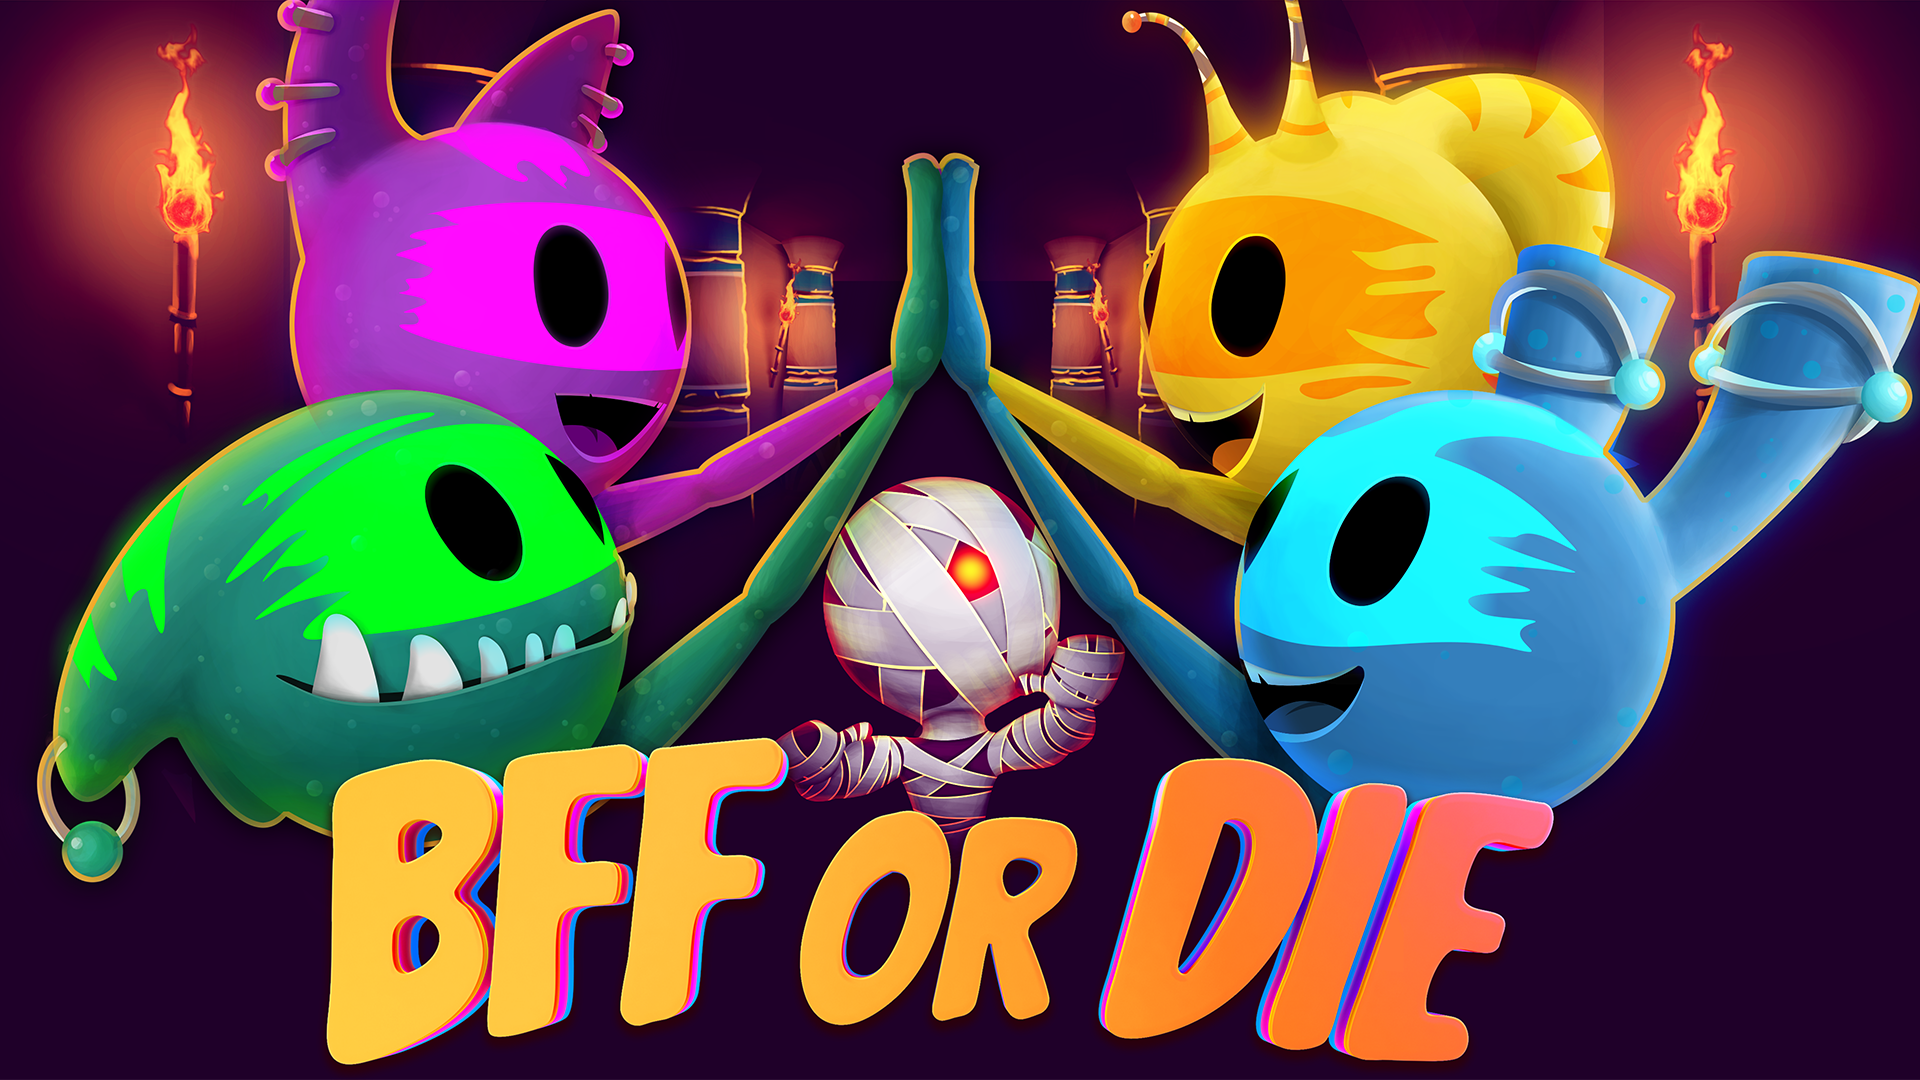 BFF Or Die on X: Which local multiplayer or couch co-op PC games